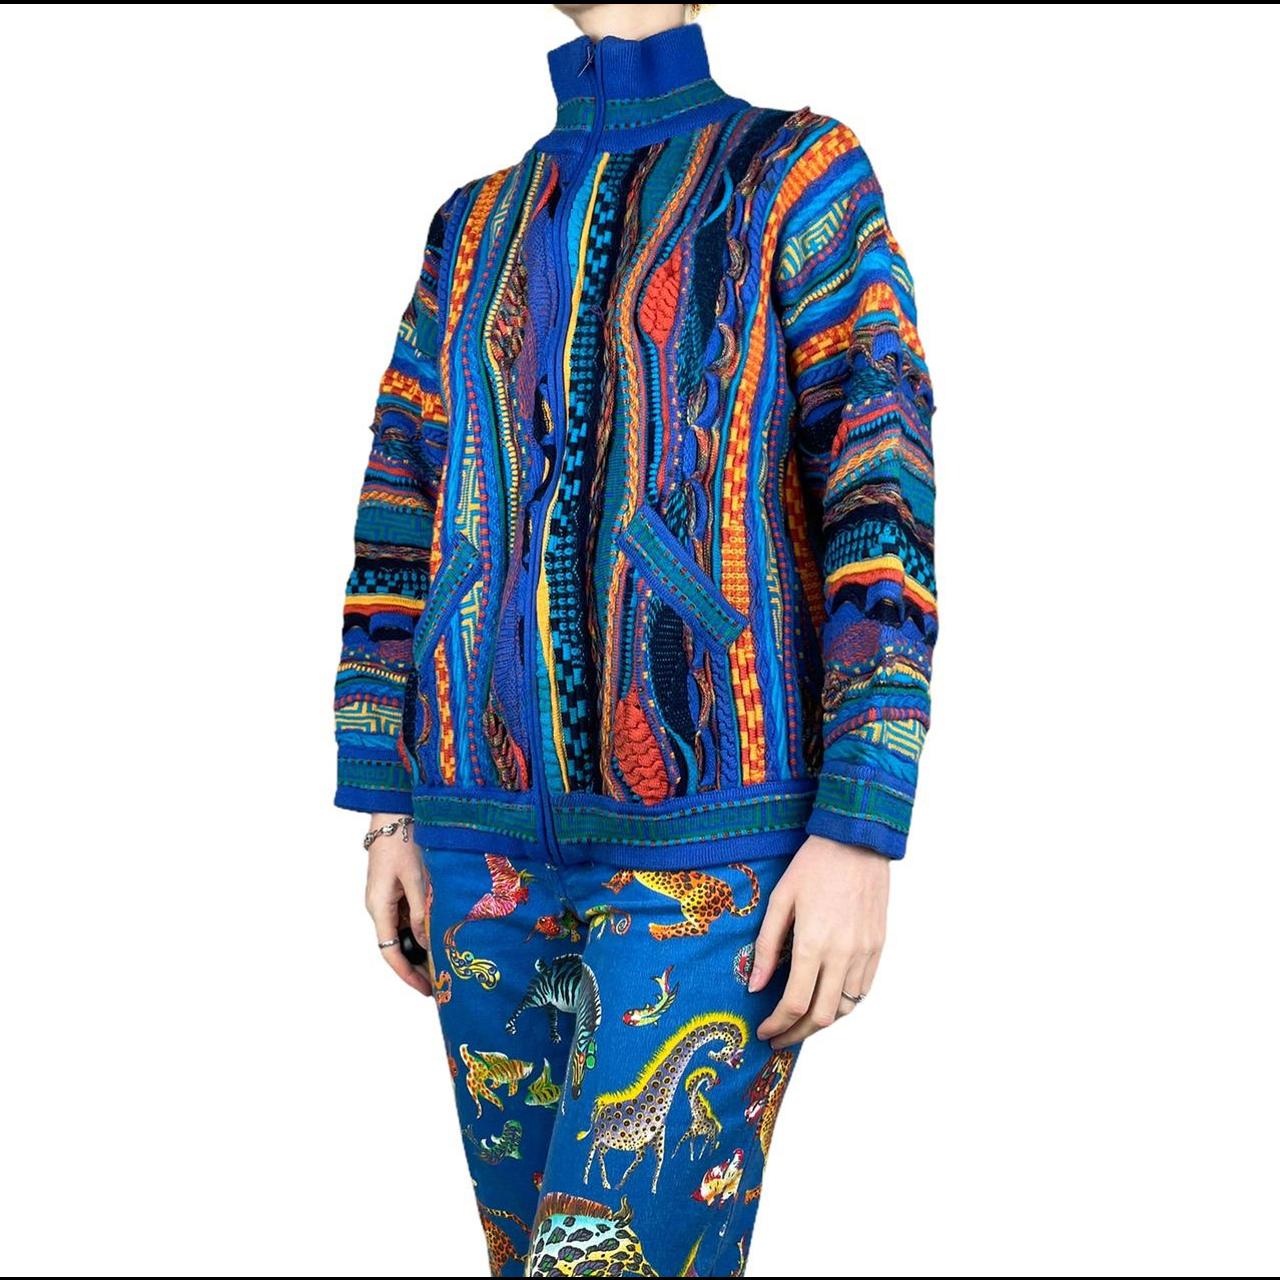 Product Image 1 - Vintage 90s Coogi style 3D